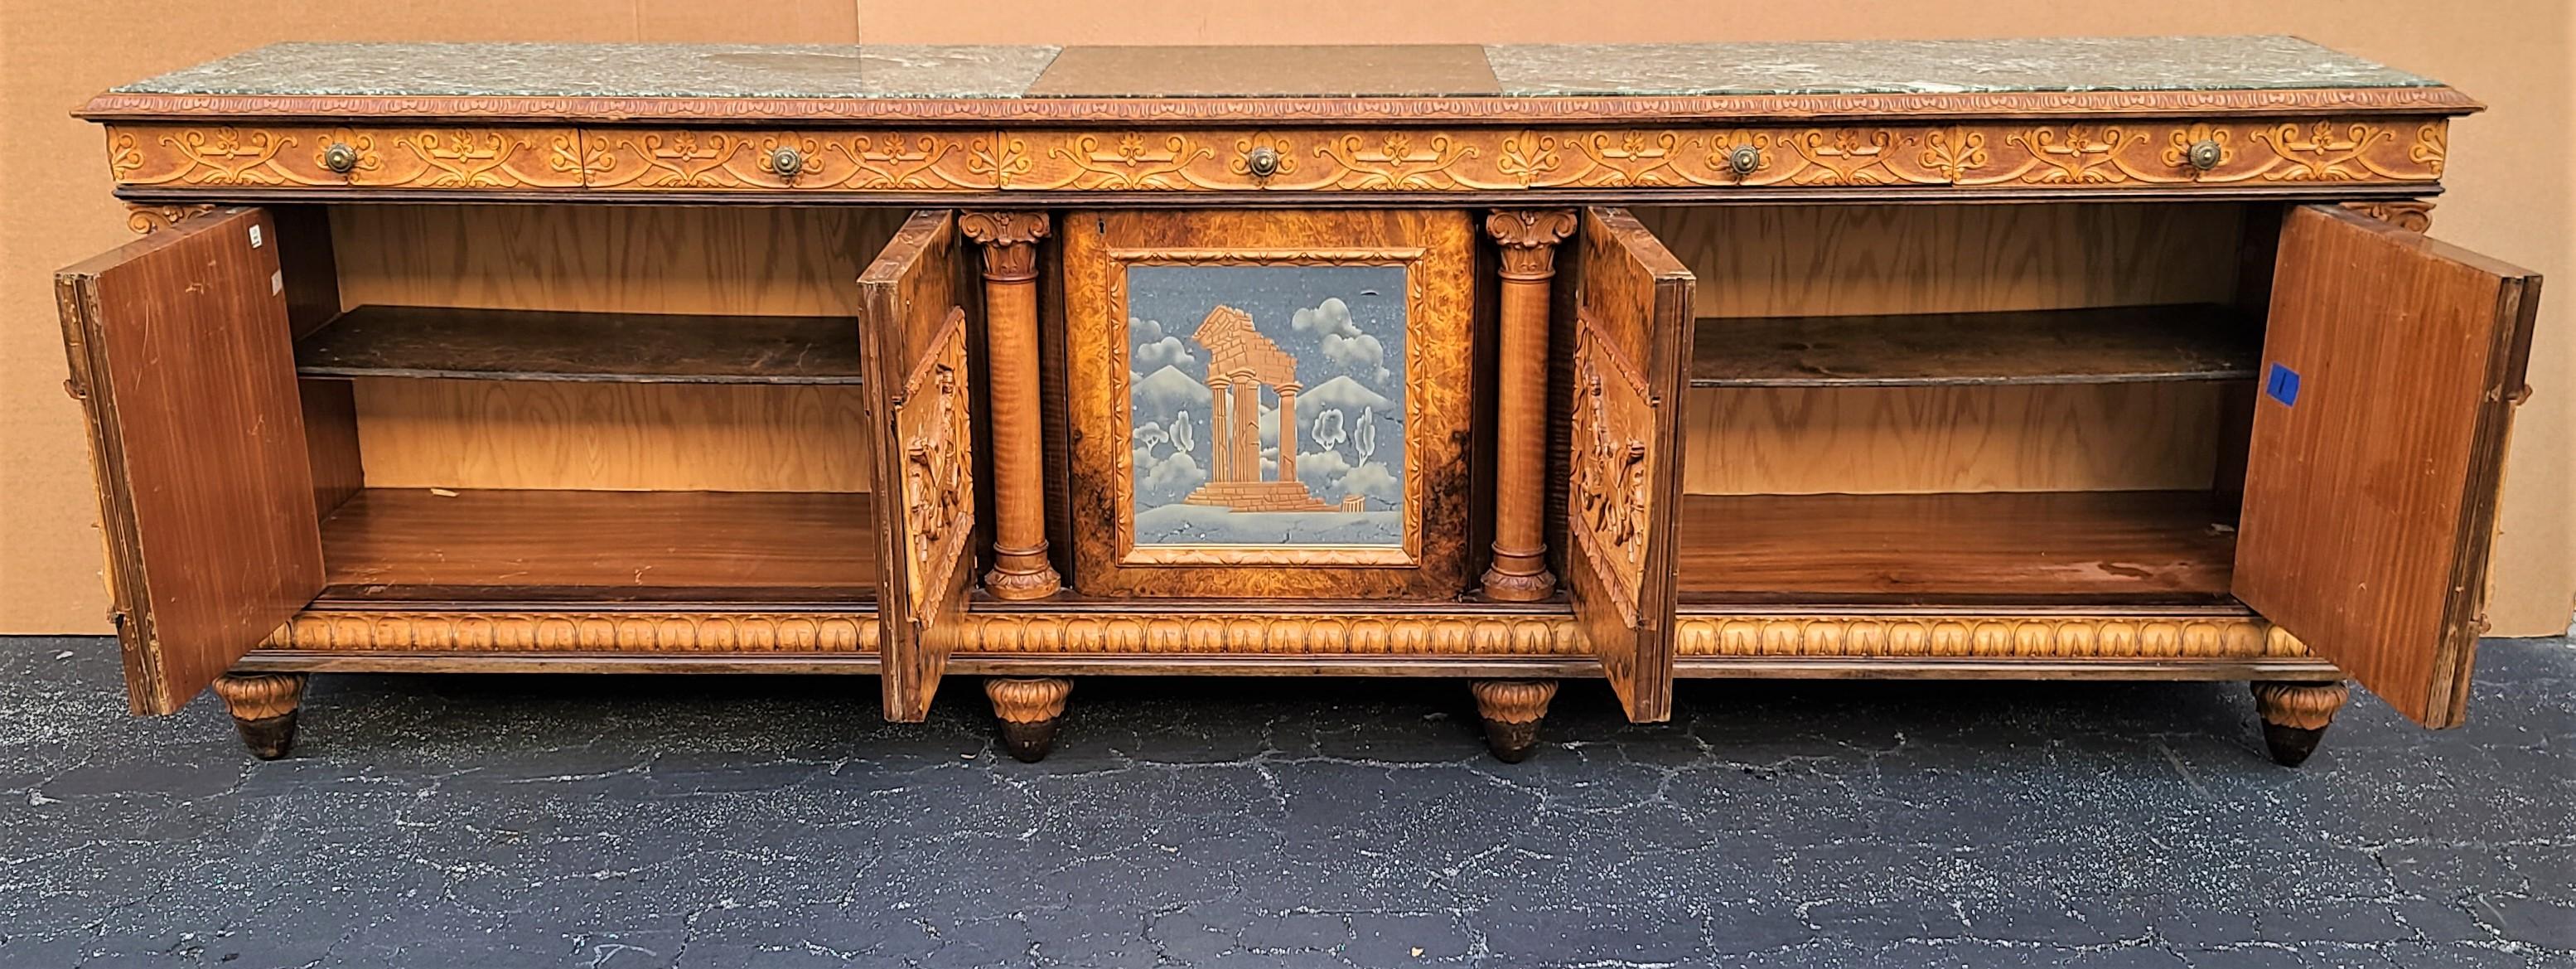 Antique c 1900 Hand Carved Neoclassical Italian Credenza Bar Cabinet For Sale 3